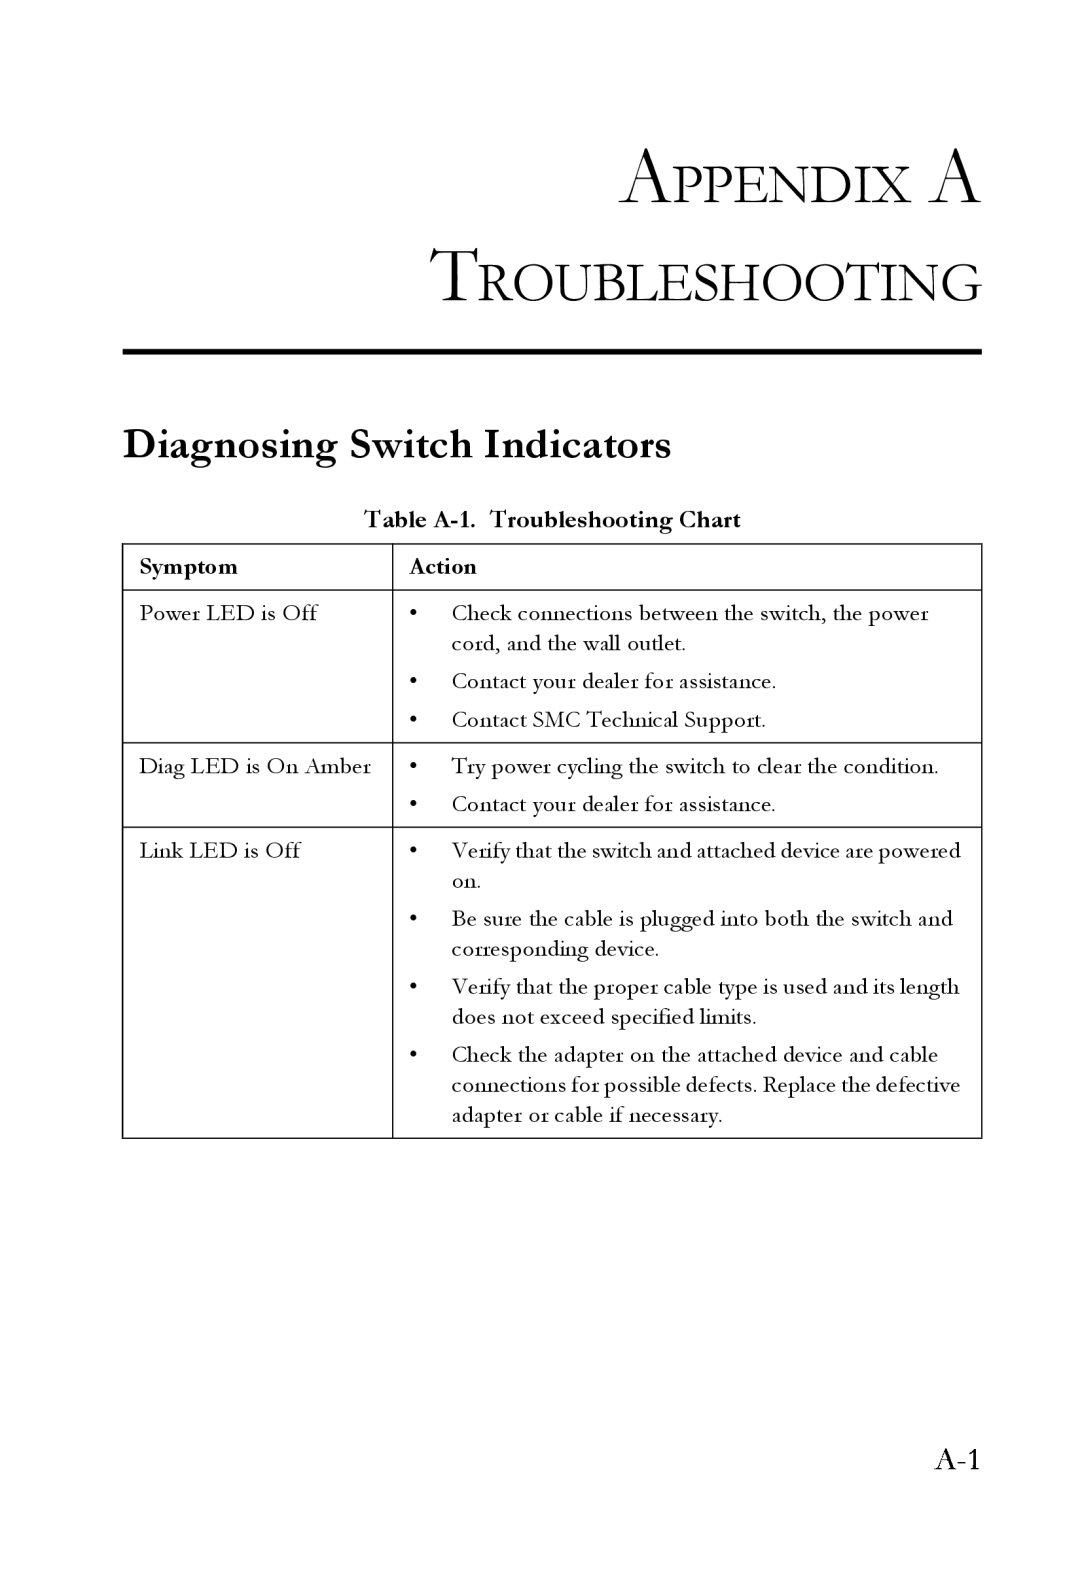 SMC Networks SMC8624T manual Appendix A Troubleshooting, Diagnosing Switch Indicators, Table A-1. Troubleshooting Chart 